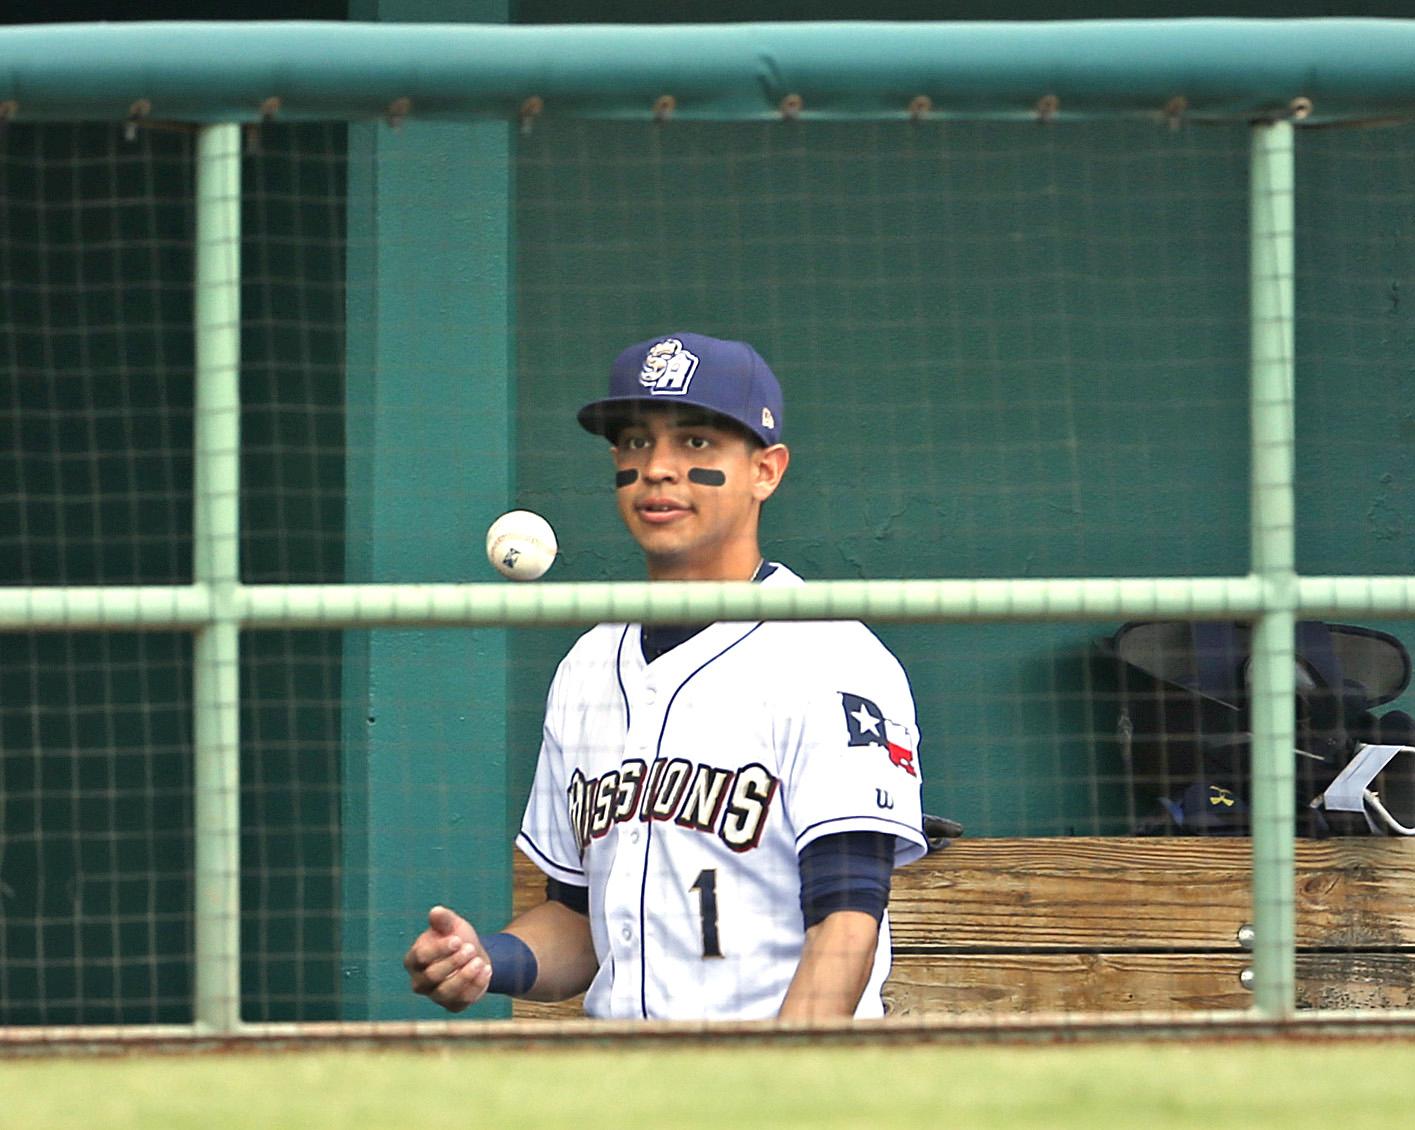 From Honduras to MLB: The unlikely journey of Missions SS Mauricio Dubon